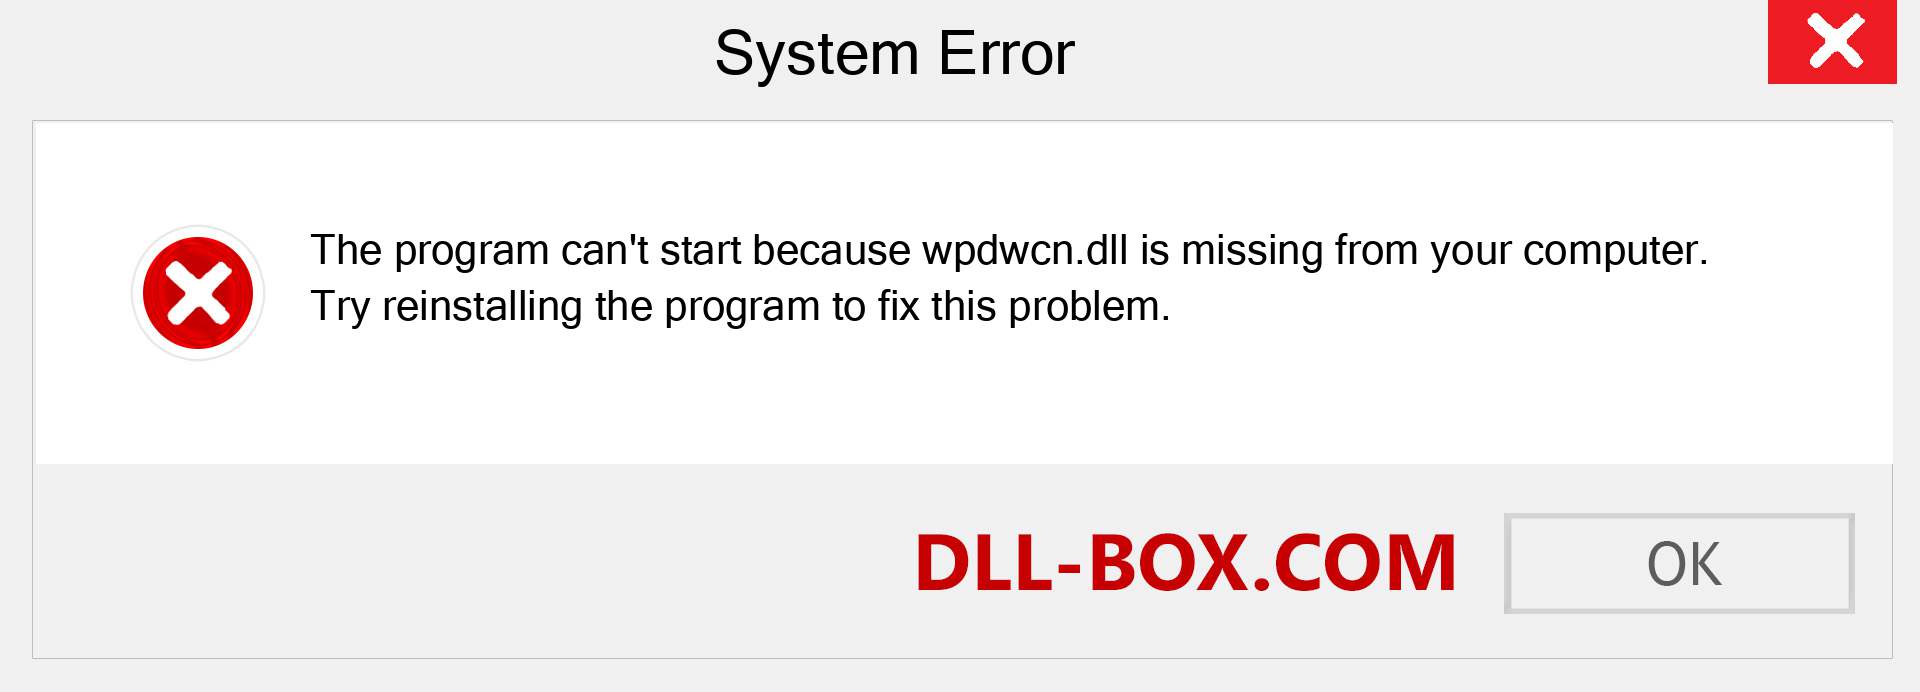  wpdwcn.dll file is missing?. Download for Windows 7, 8, 10 - Fix  wpdwcn dll Missing Error on Windows, photos, images